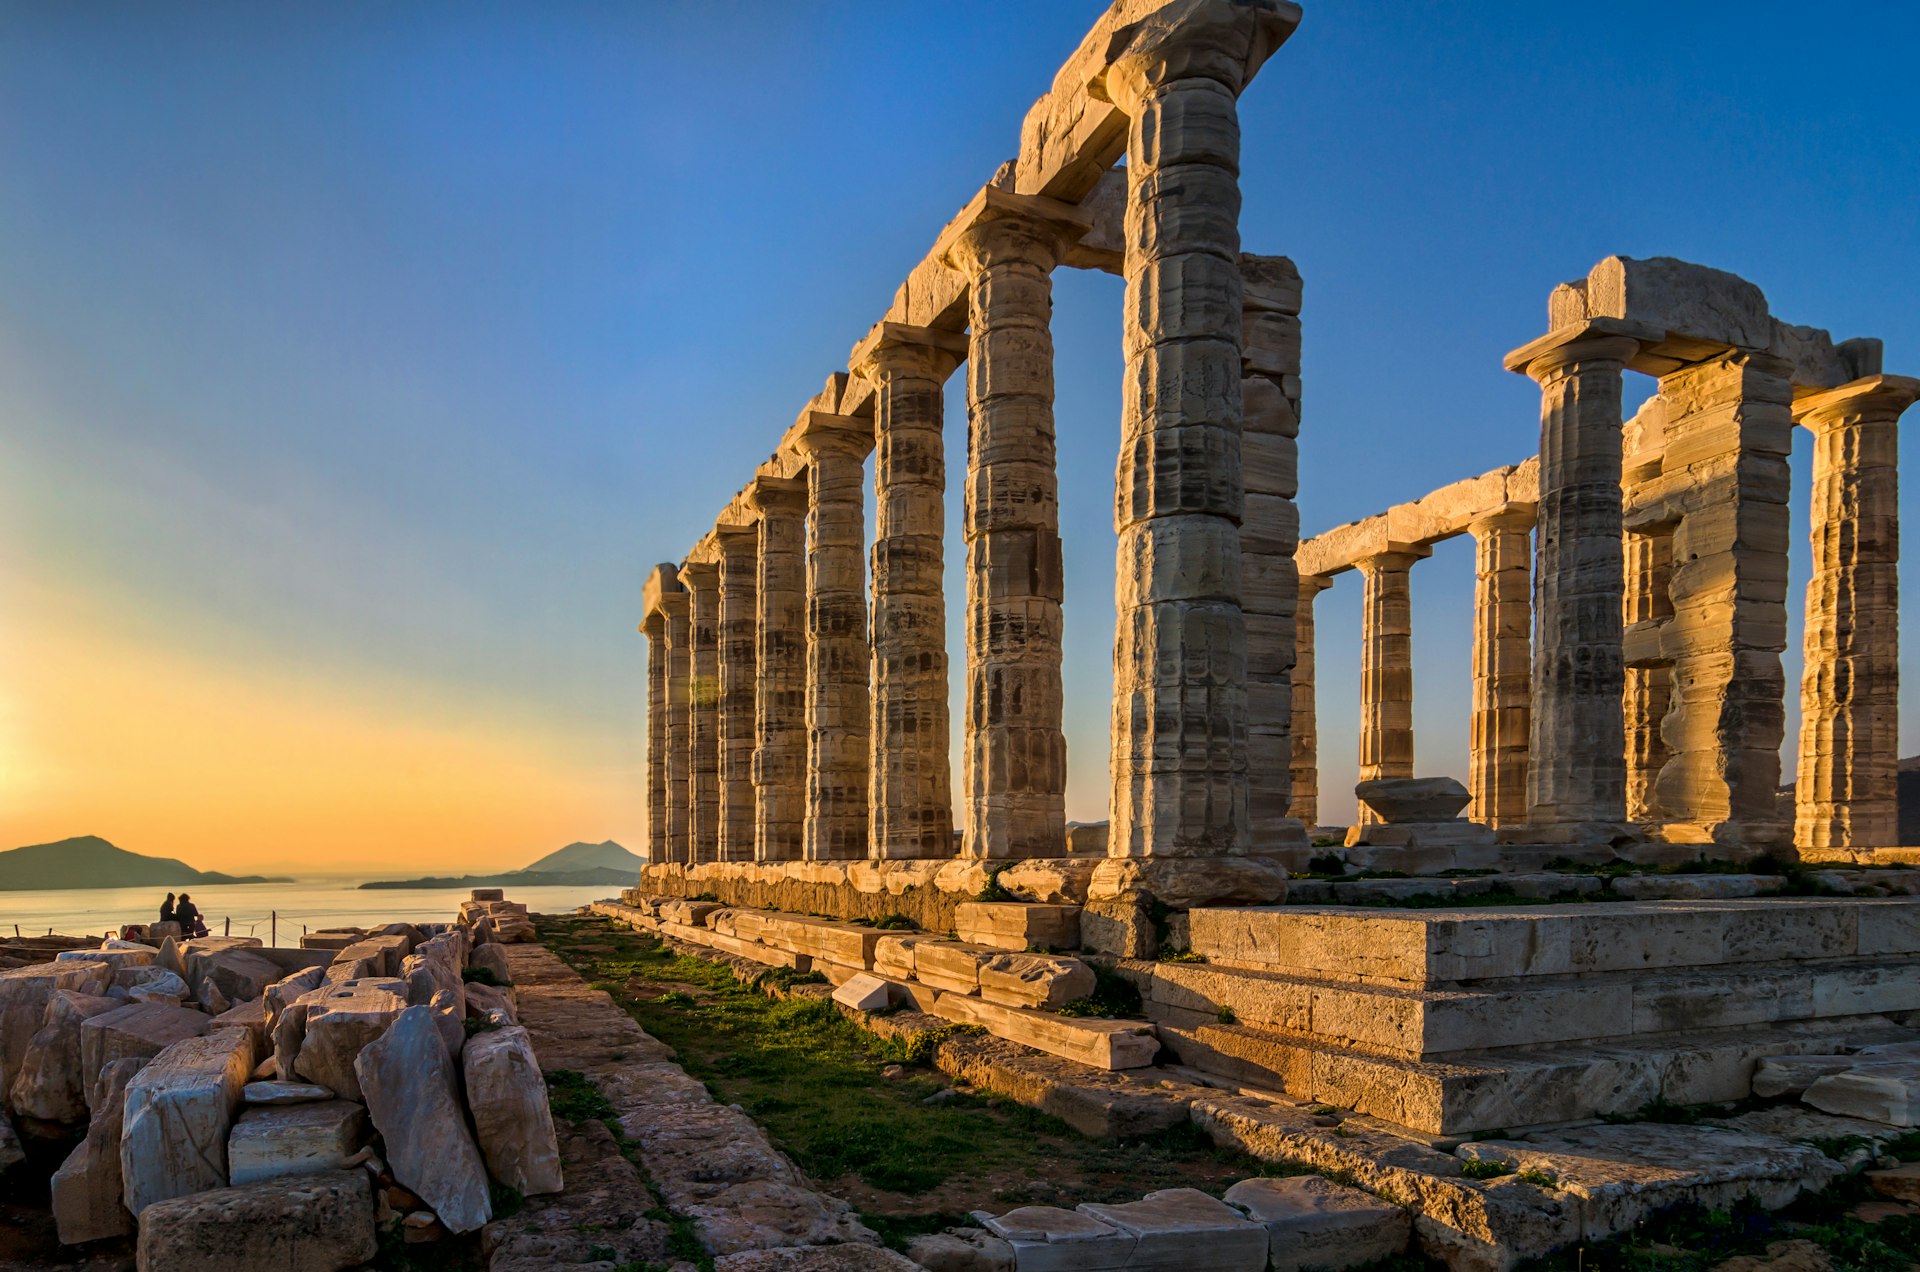 The Temple of Poseidon at cape Sounion during sunset. The ancient temple has a number of white columns and is built on a hilltop overlooking the sea in Greece.